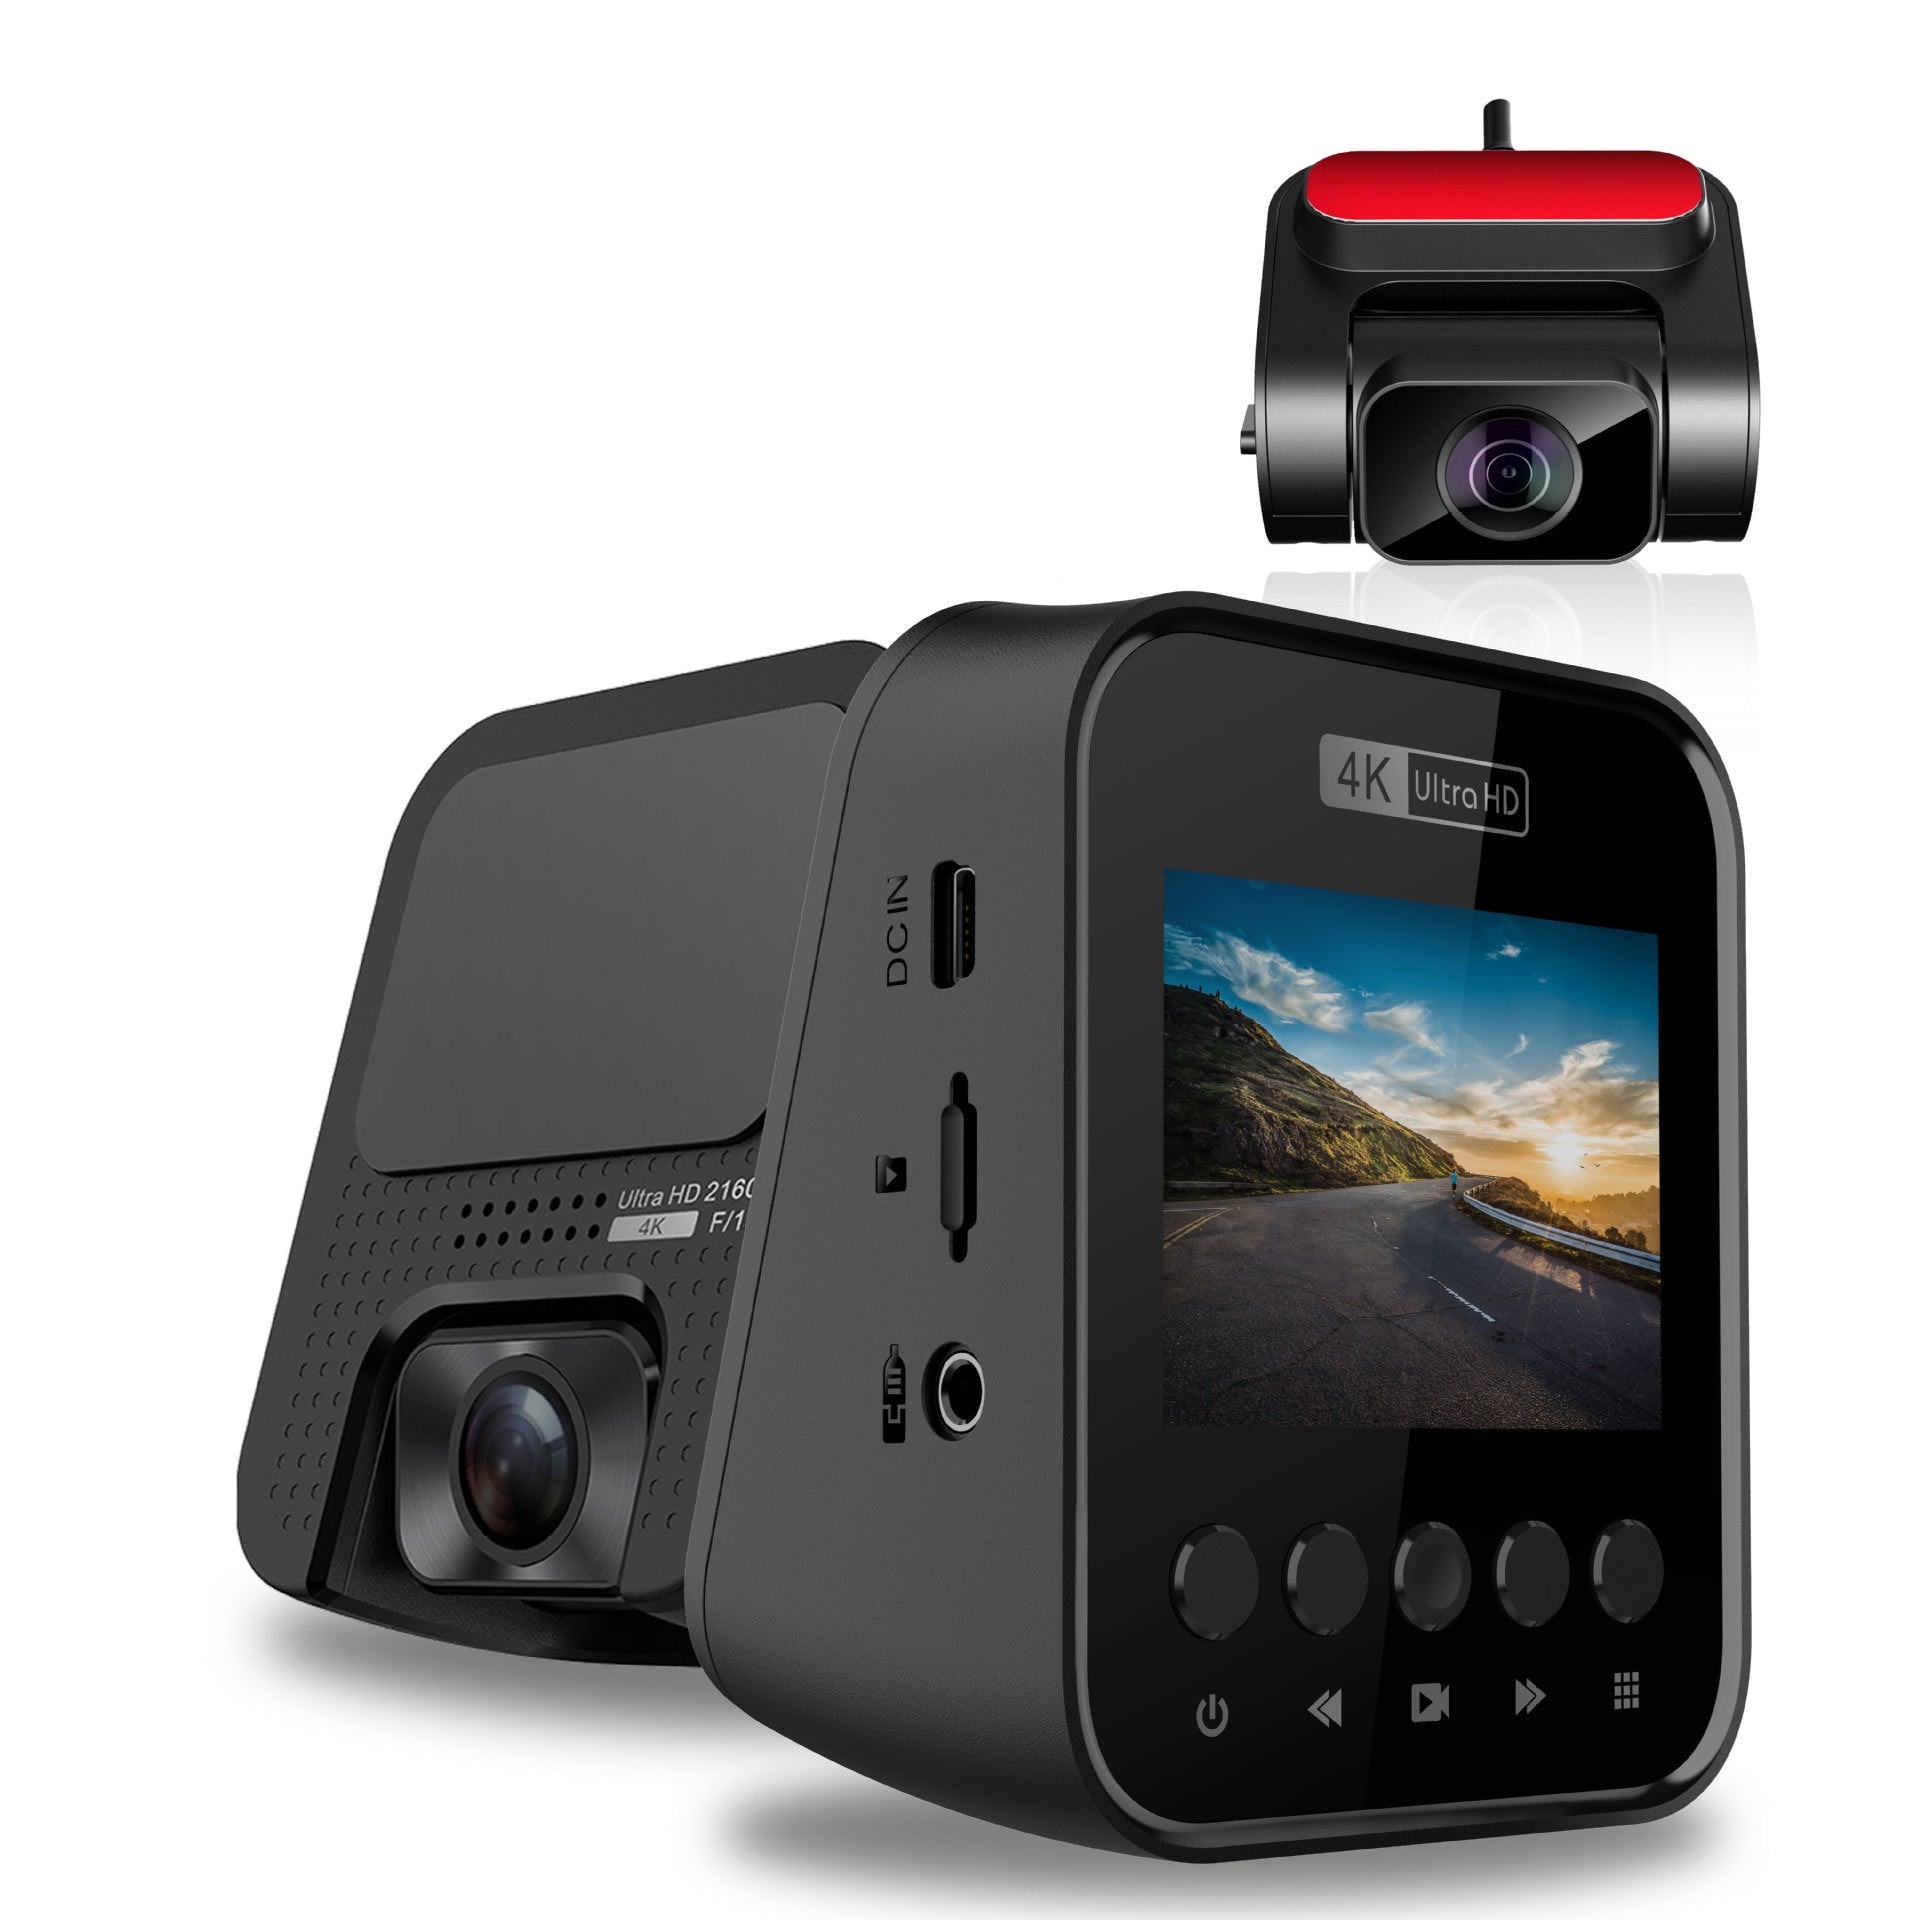 4K Dash Cam Built in eMMC Storage Gps Wifi for Automatic Recorder 3840*2160P 30FPS Night Vision Front and Rear Dashcam IMX415 - MackTechBiz